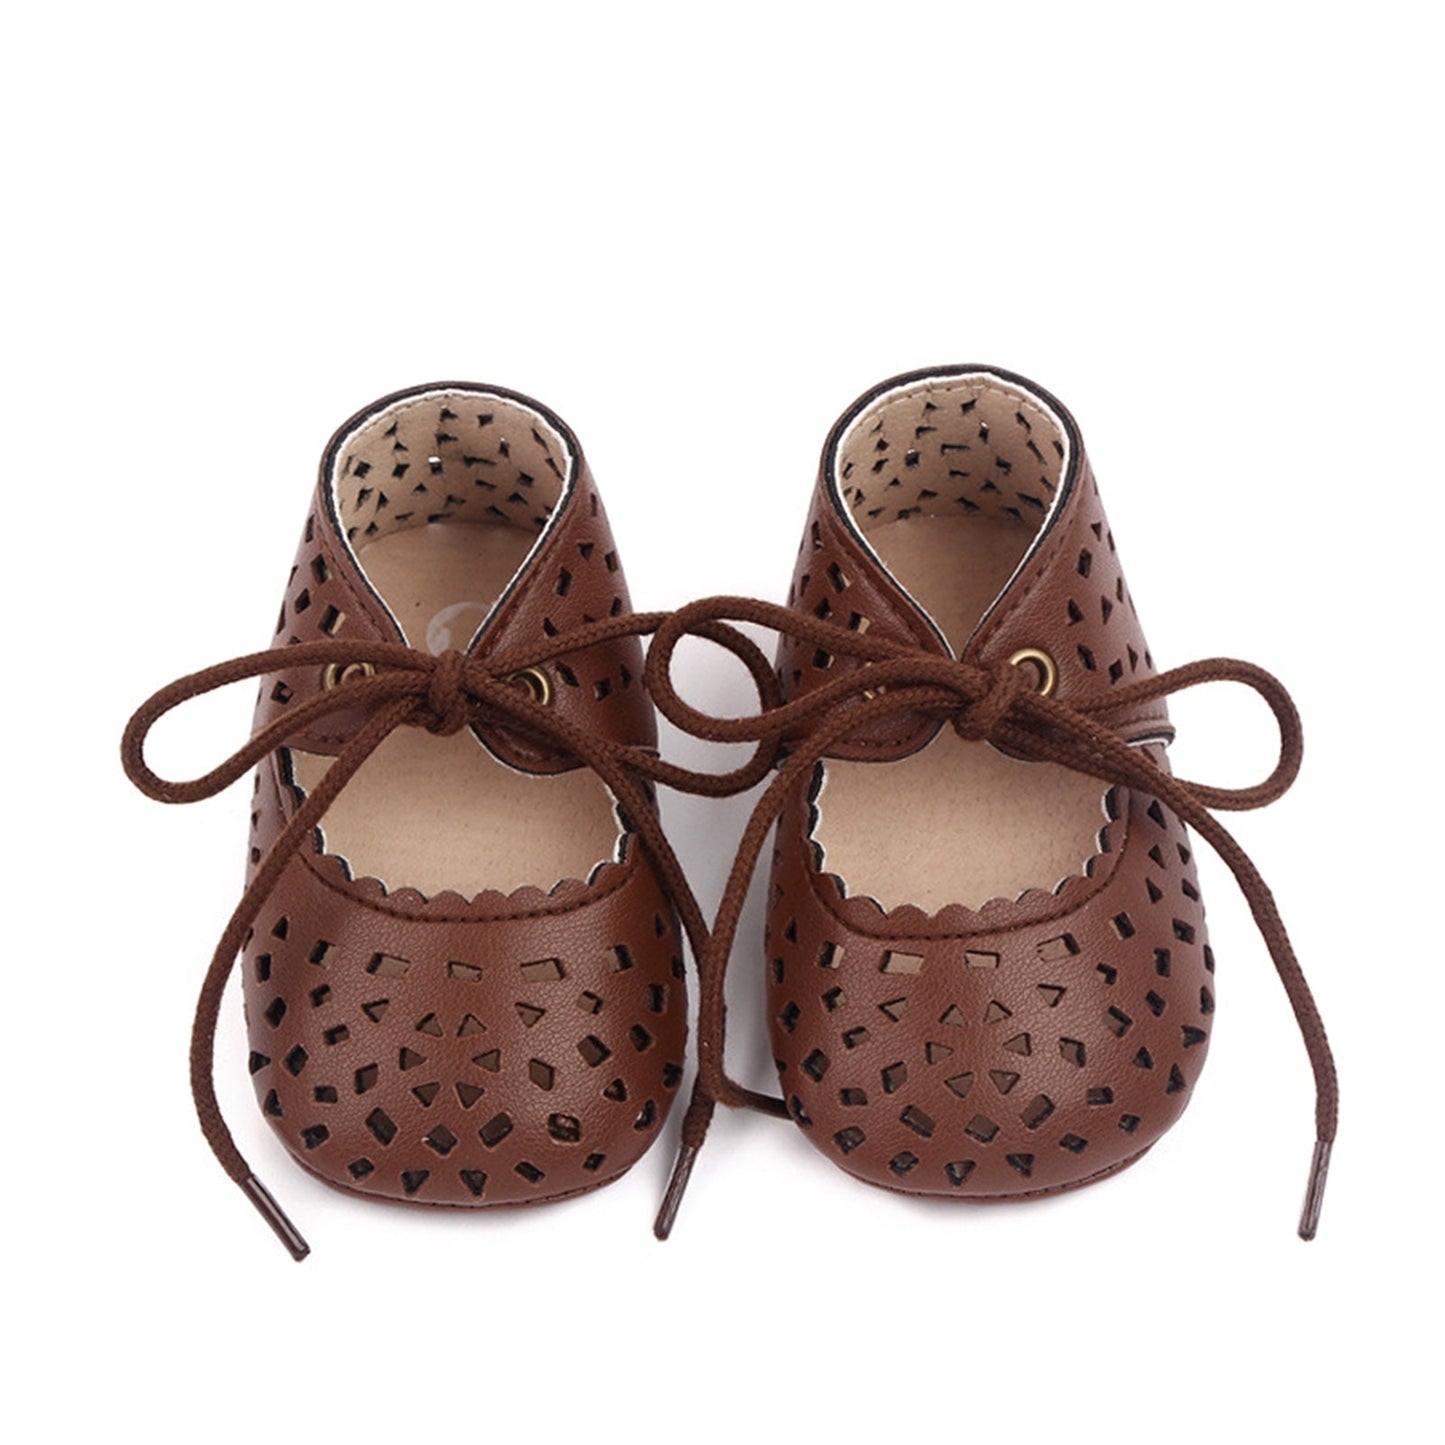 Cut Out Lace shoes - Chocolate